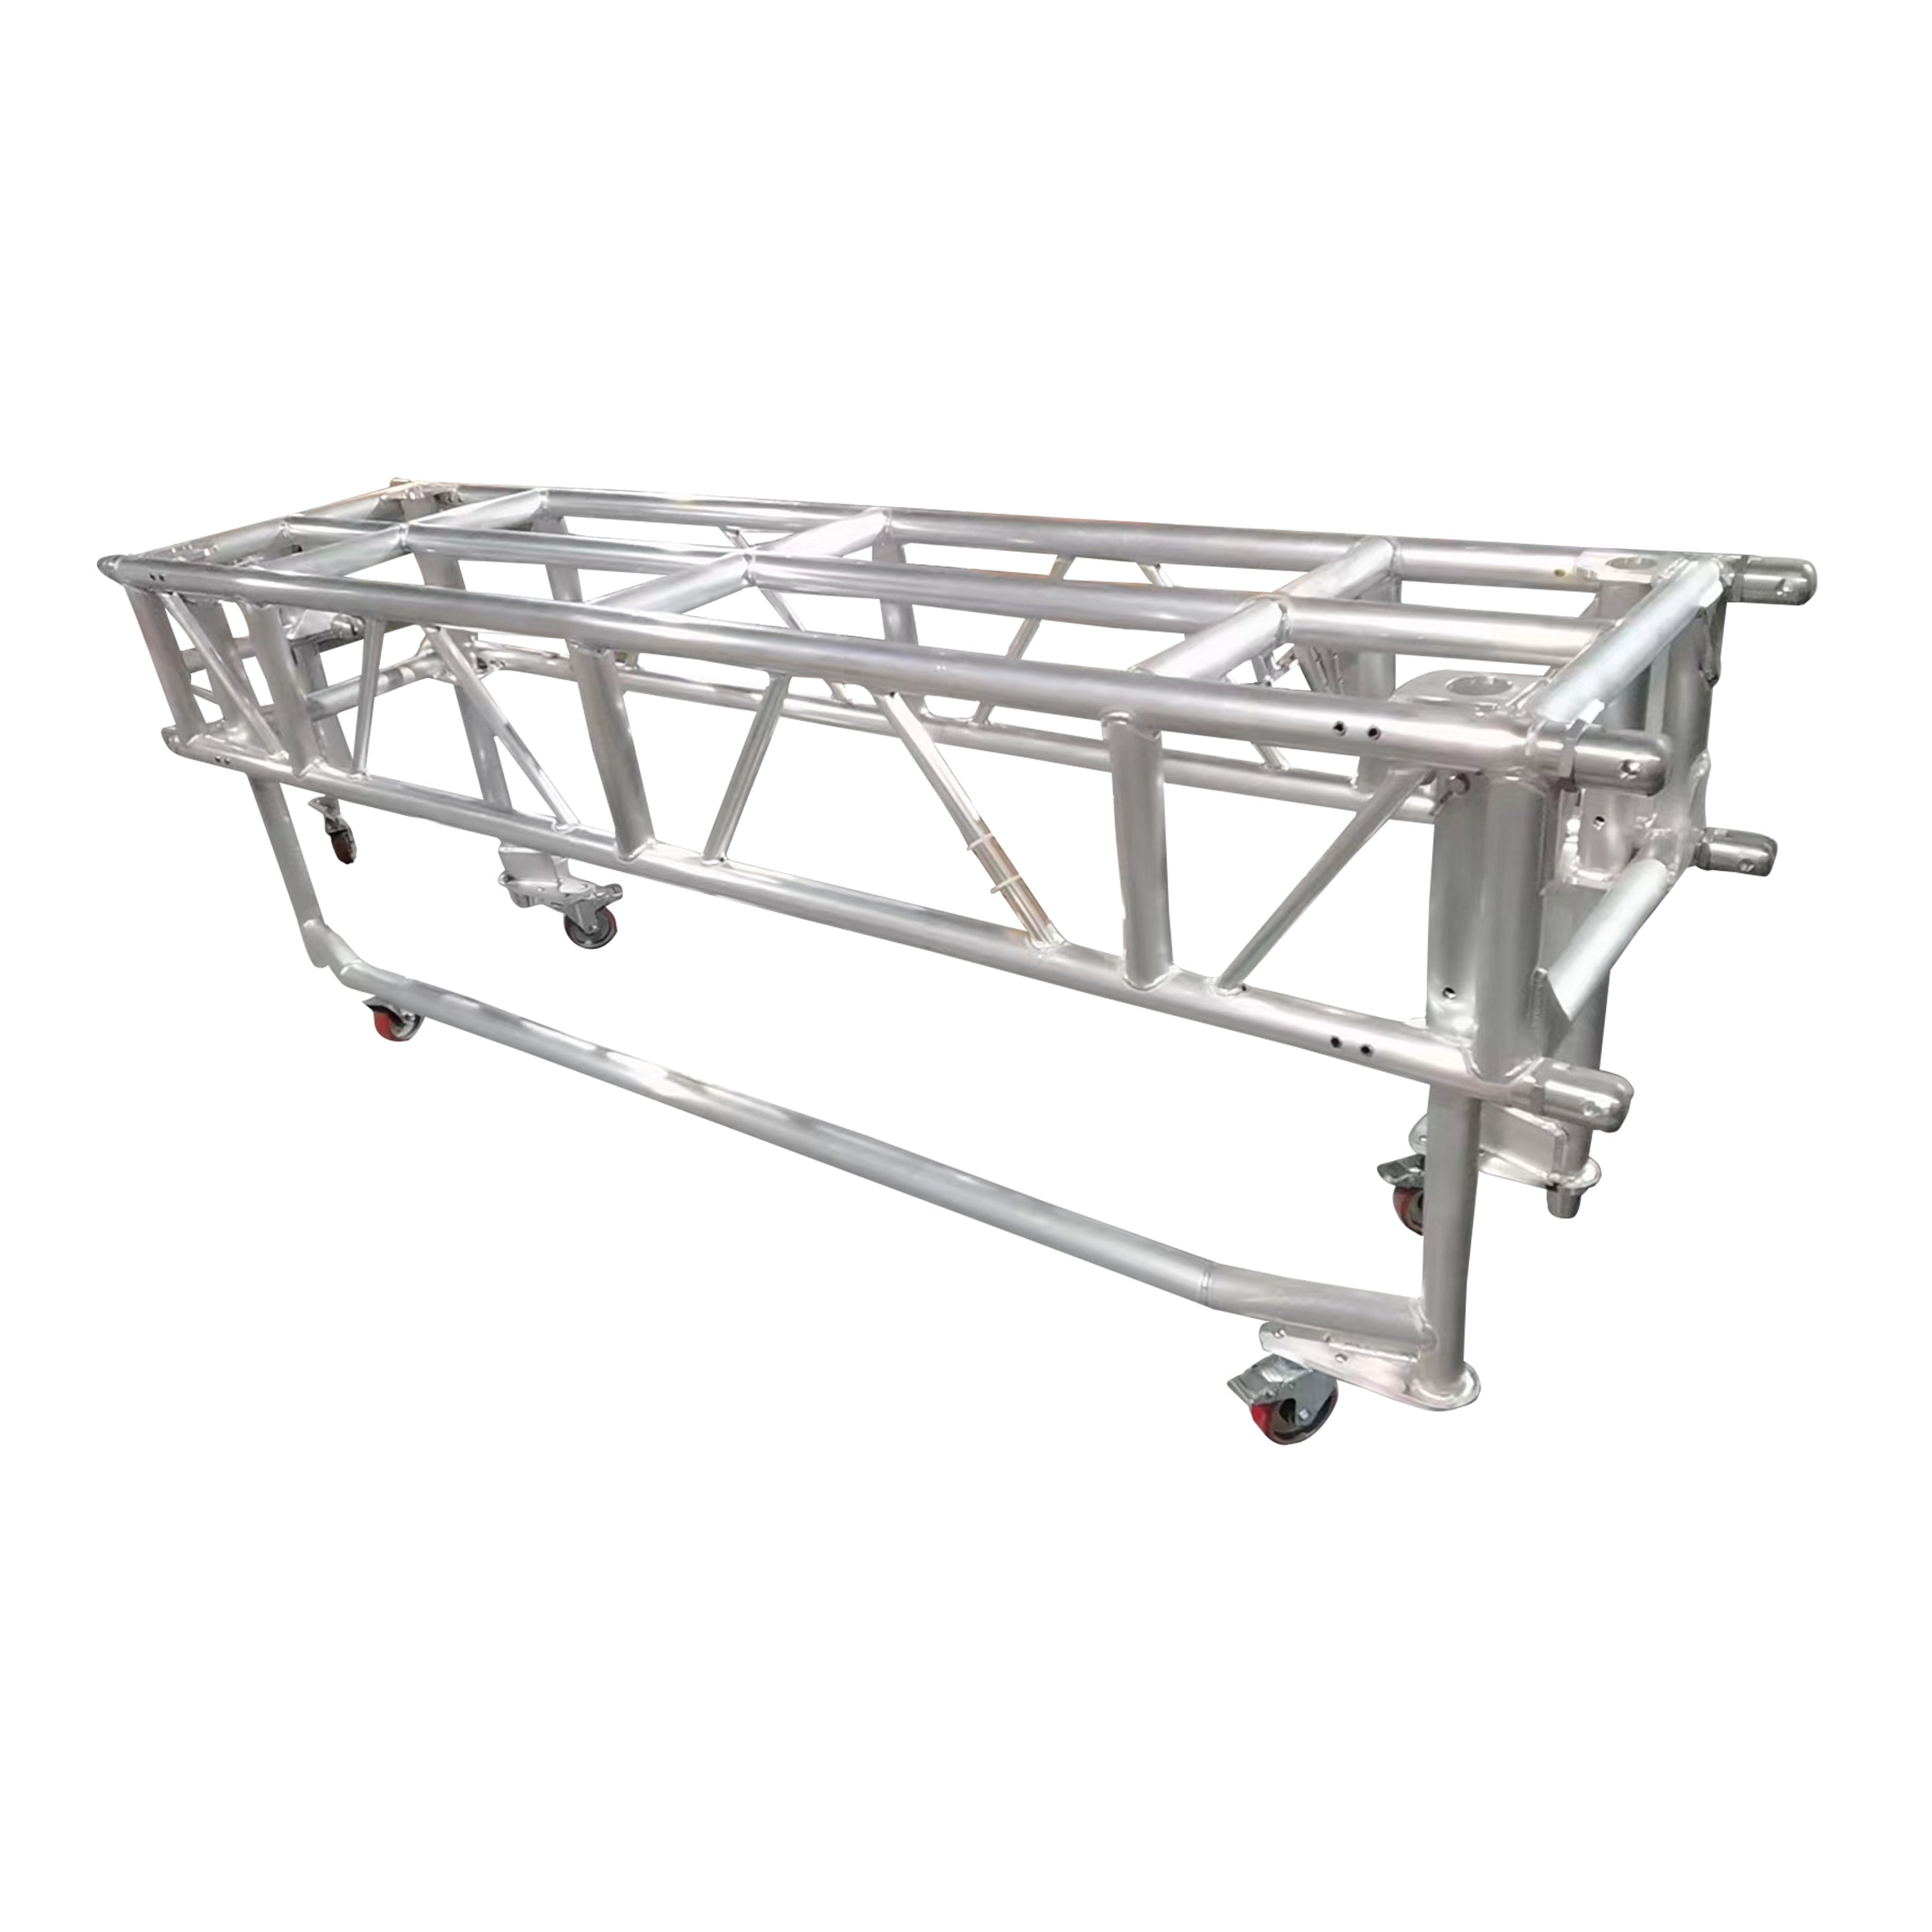 Pro X 10' FT Pre-Rig Rectangular Truss Segment with Removable Rolling Base System XT-PRERIG10FT